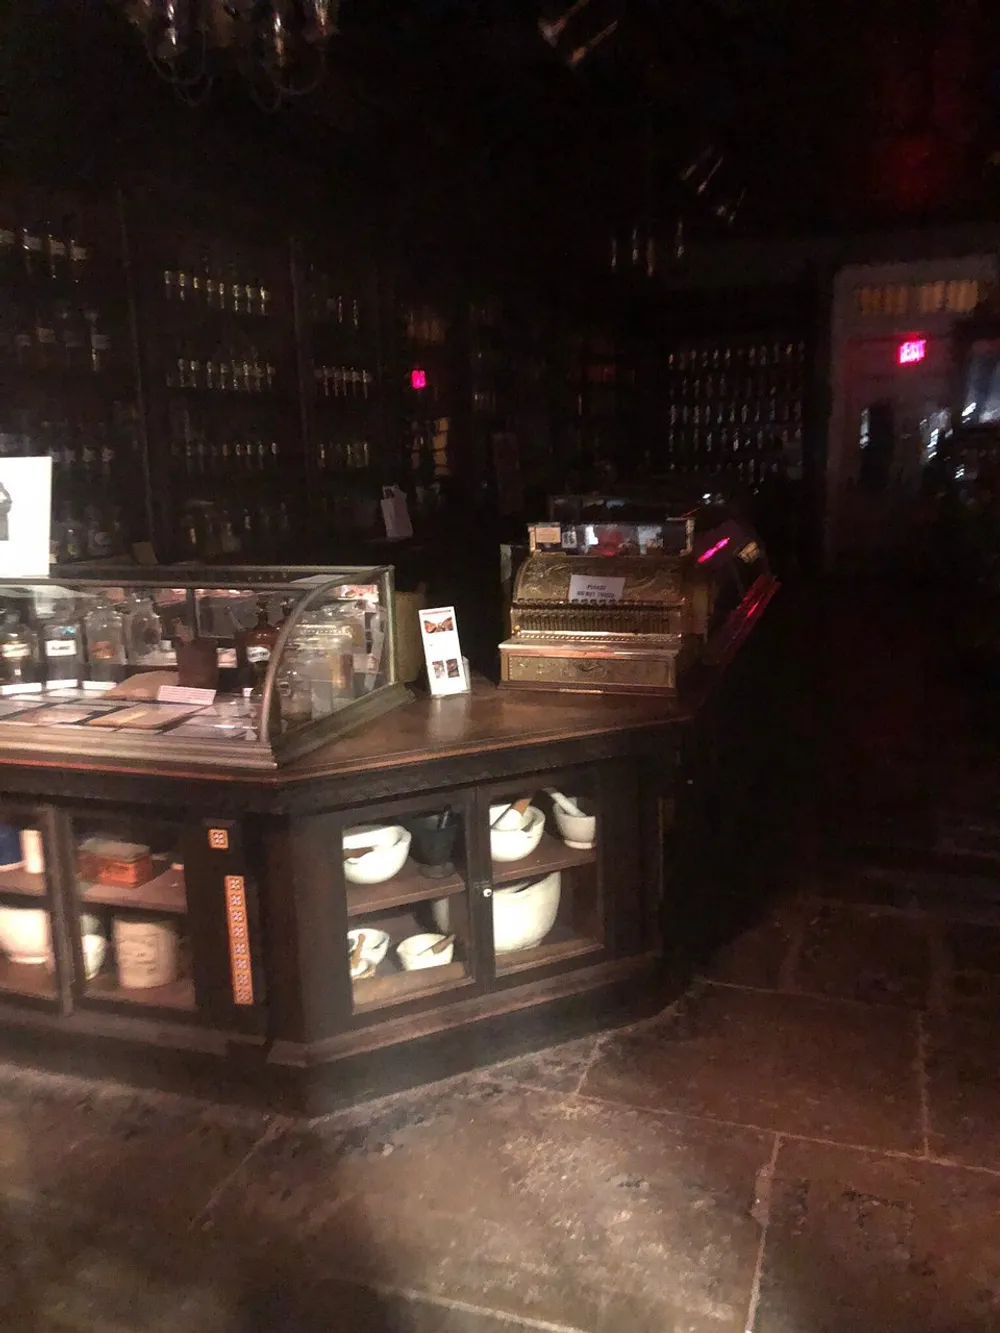 The image depicts a dimly lit interior possibly a vintage or old-fashioned shop or apothecary with shelves full of bottles and a counter showcasing various items